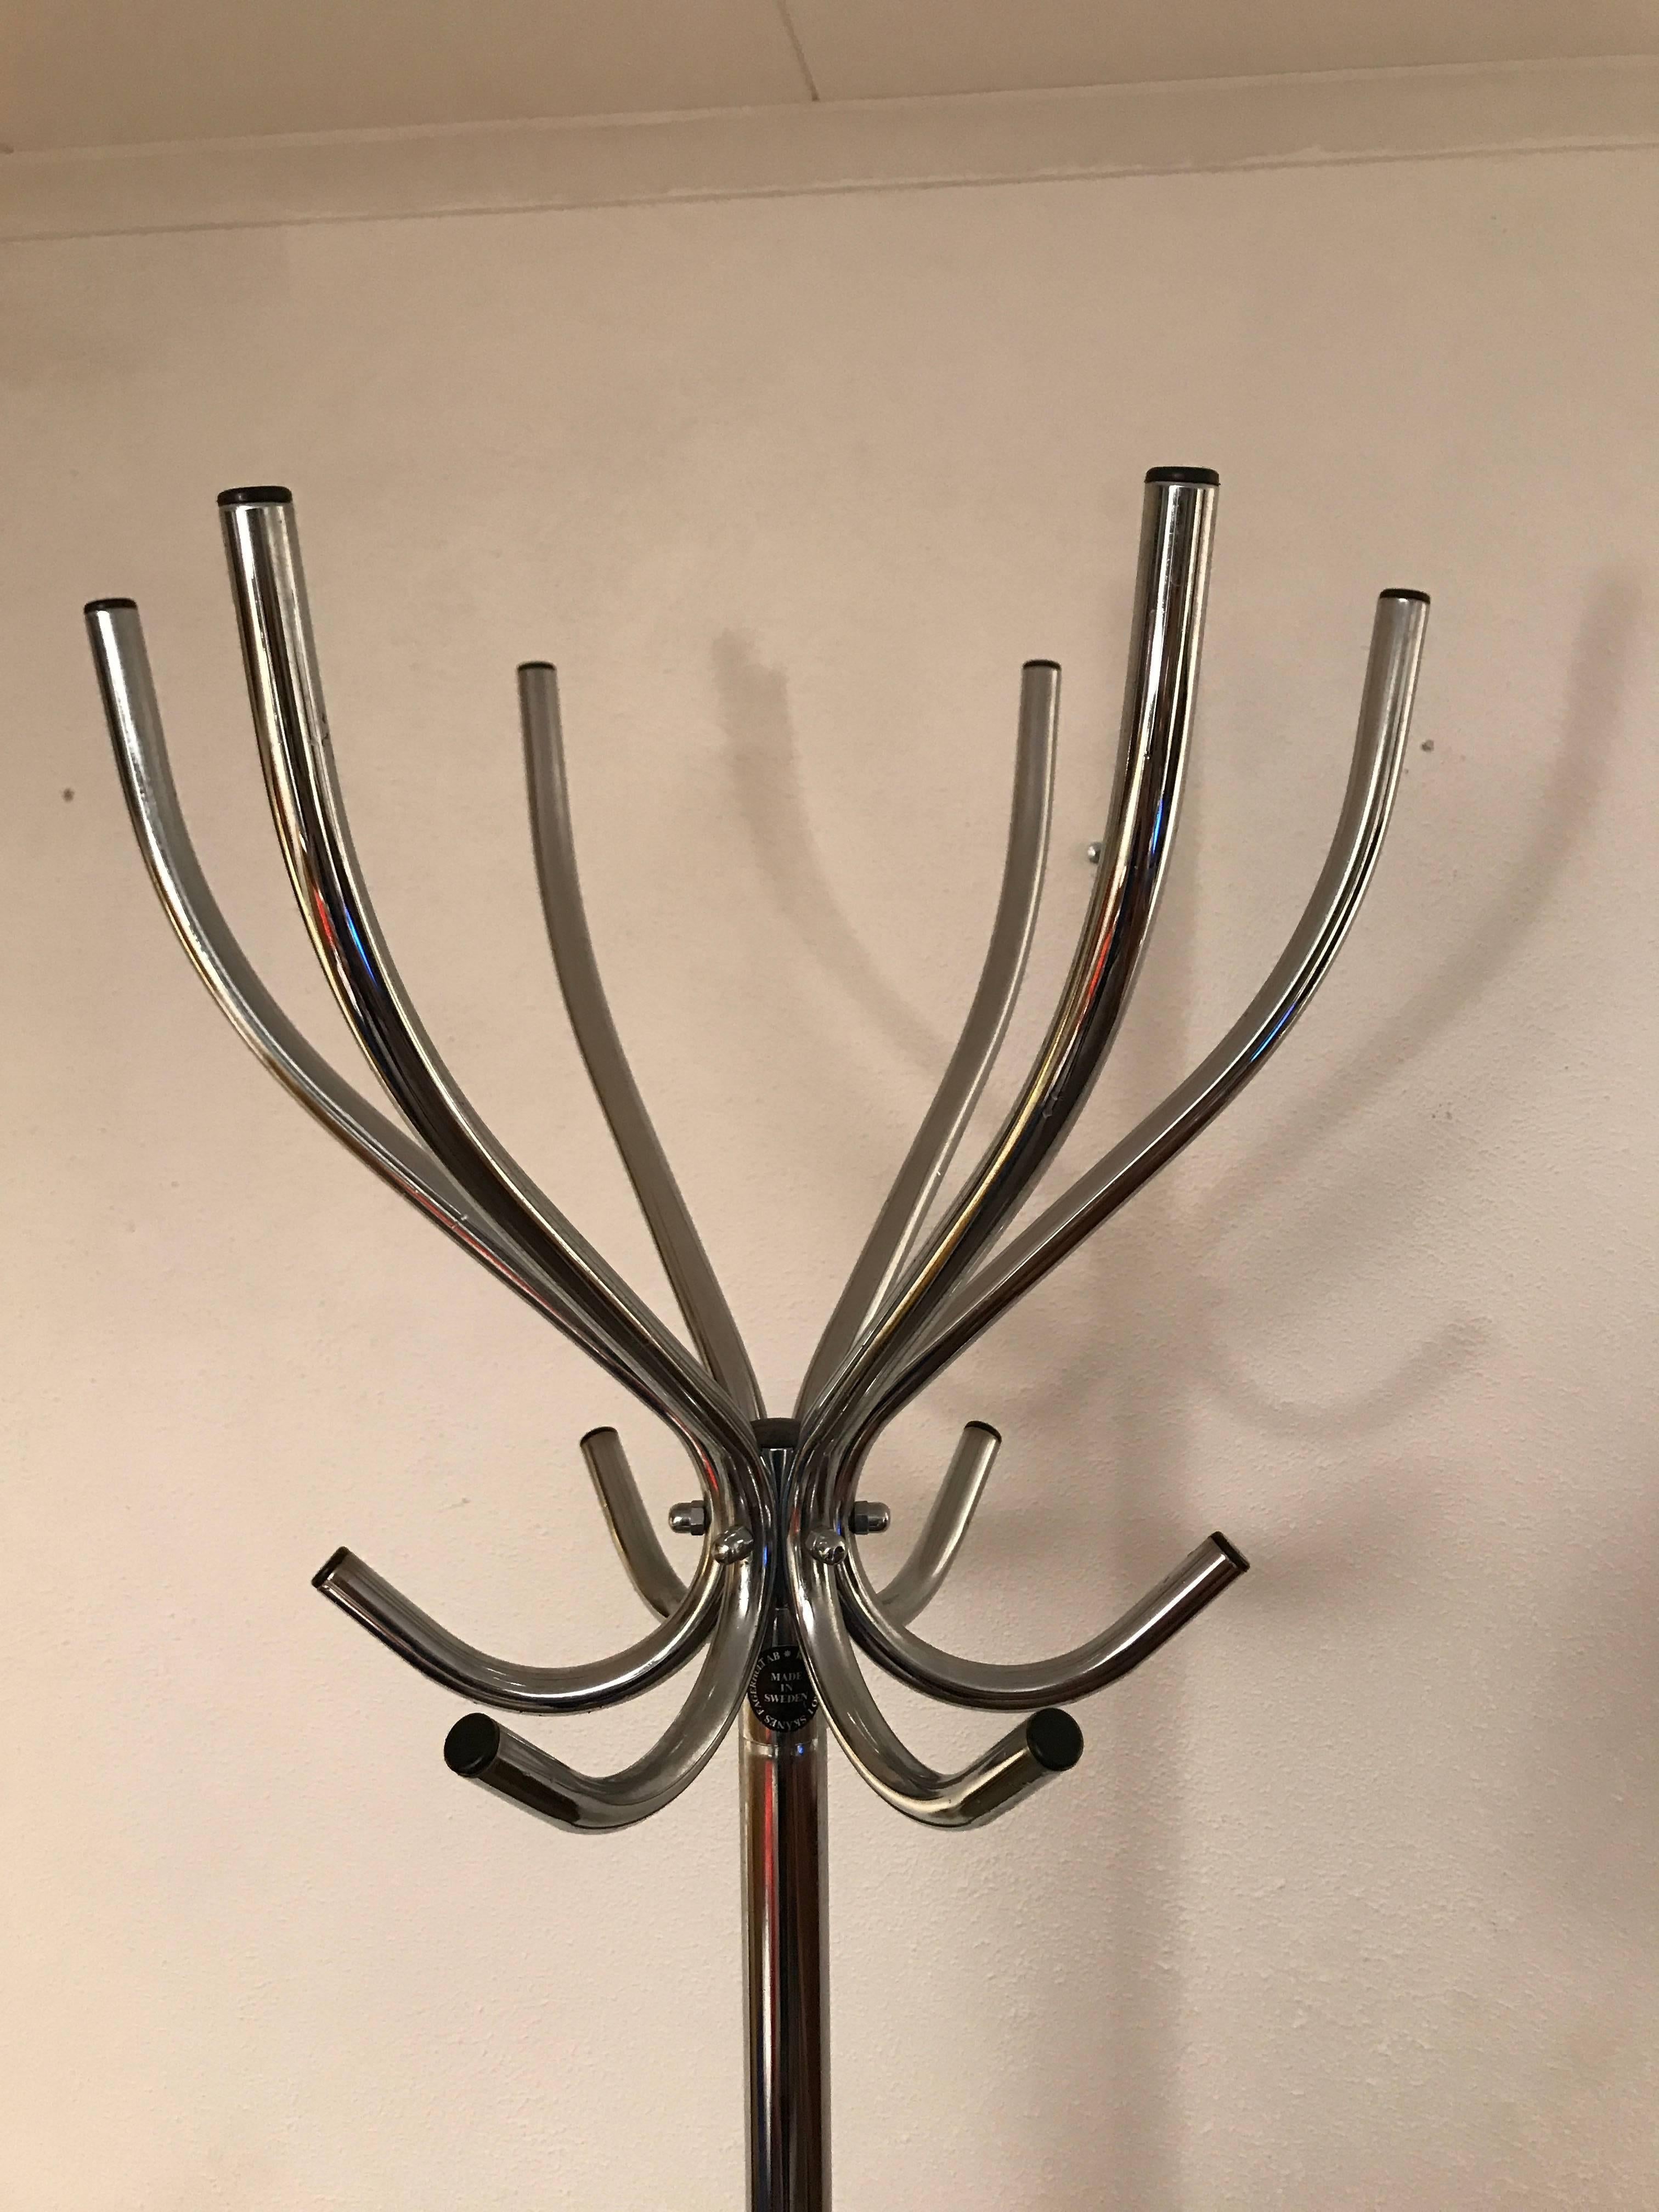 Swedish 1960 Chrome Steel Coat Tree Stand. A very nice chrome steel coat hanger stand, 182 cm in height with sic hooks and hat hangers. 